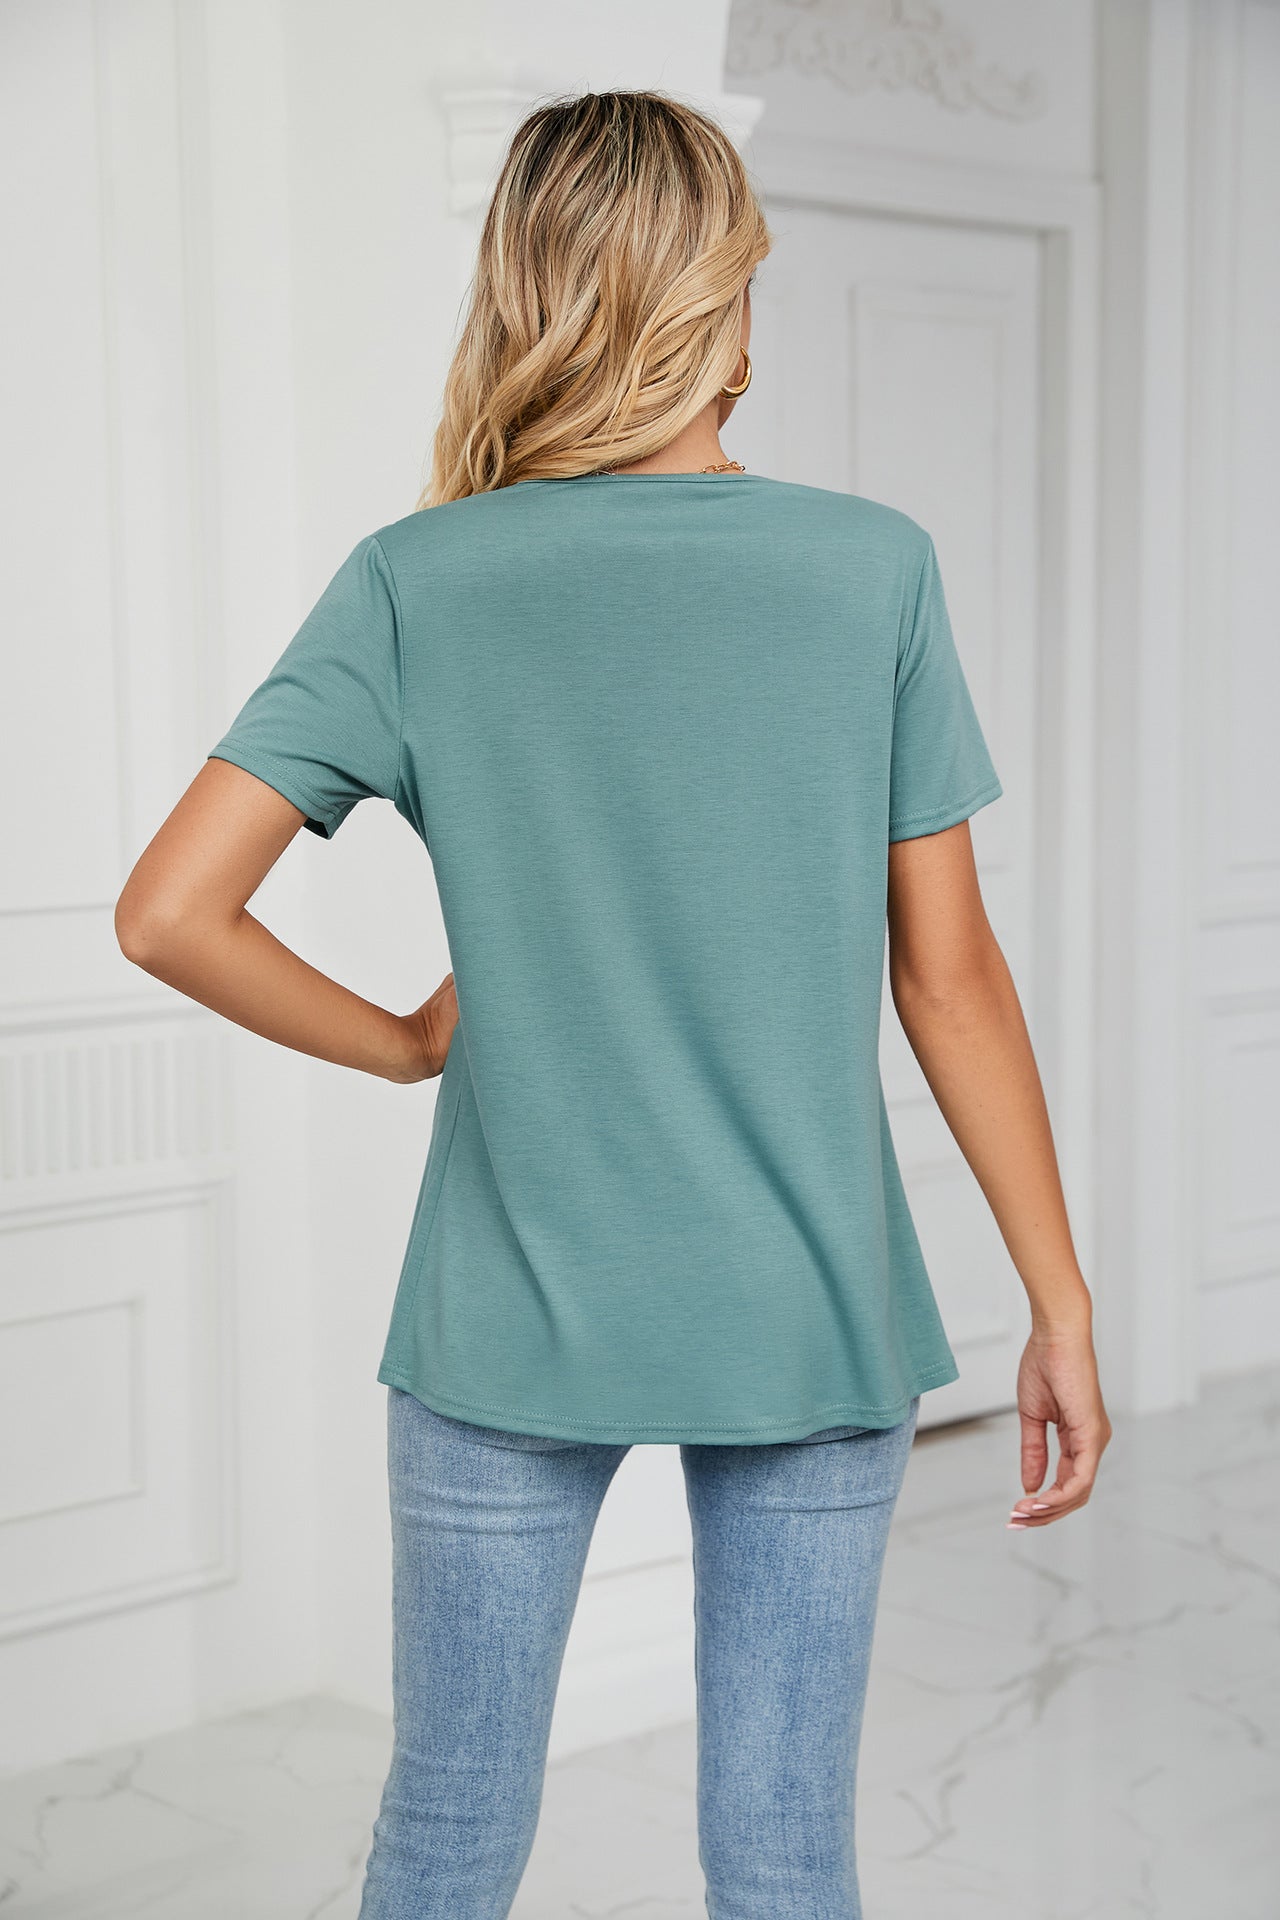 Solid Color round Neck Criss Cross Loose Short Sleeve T-shirt Top